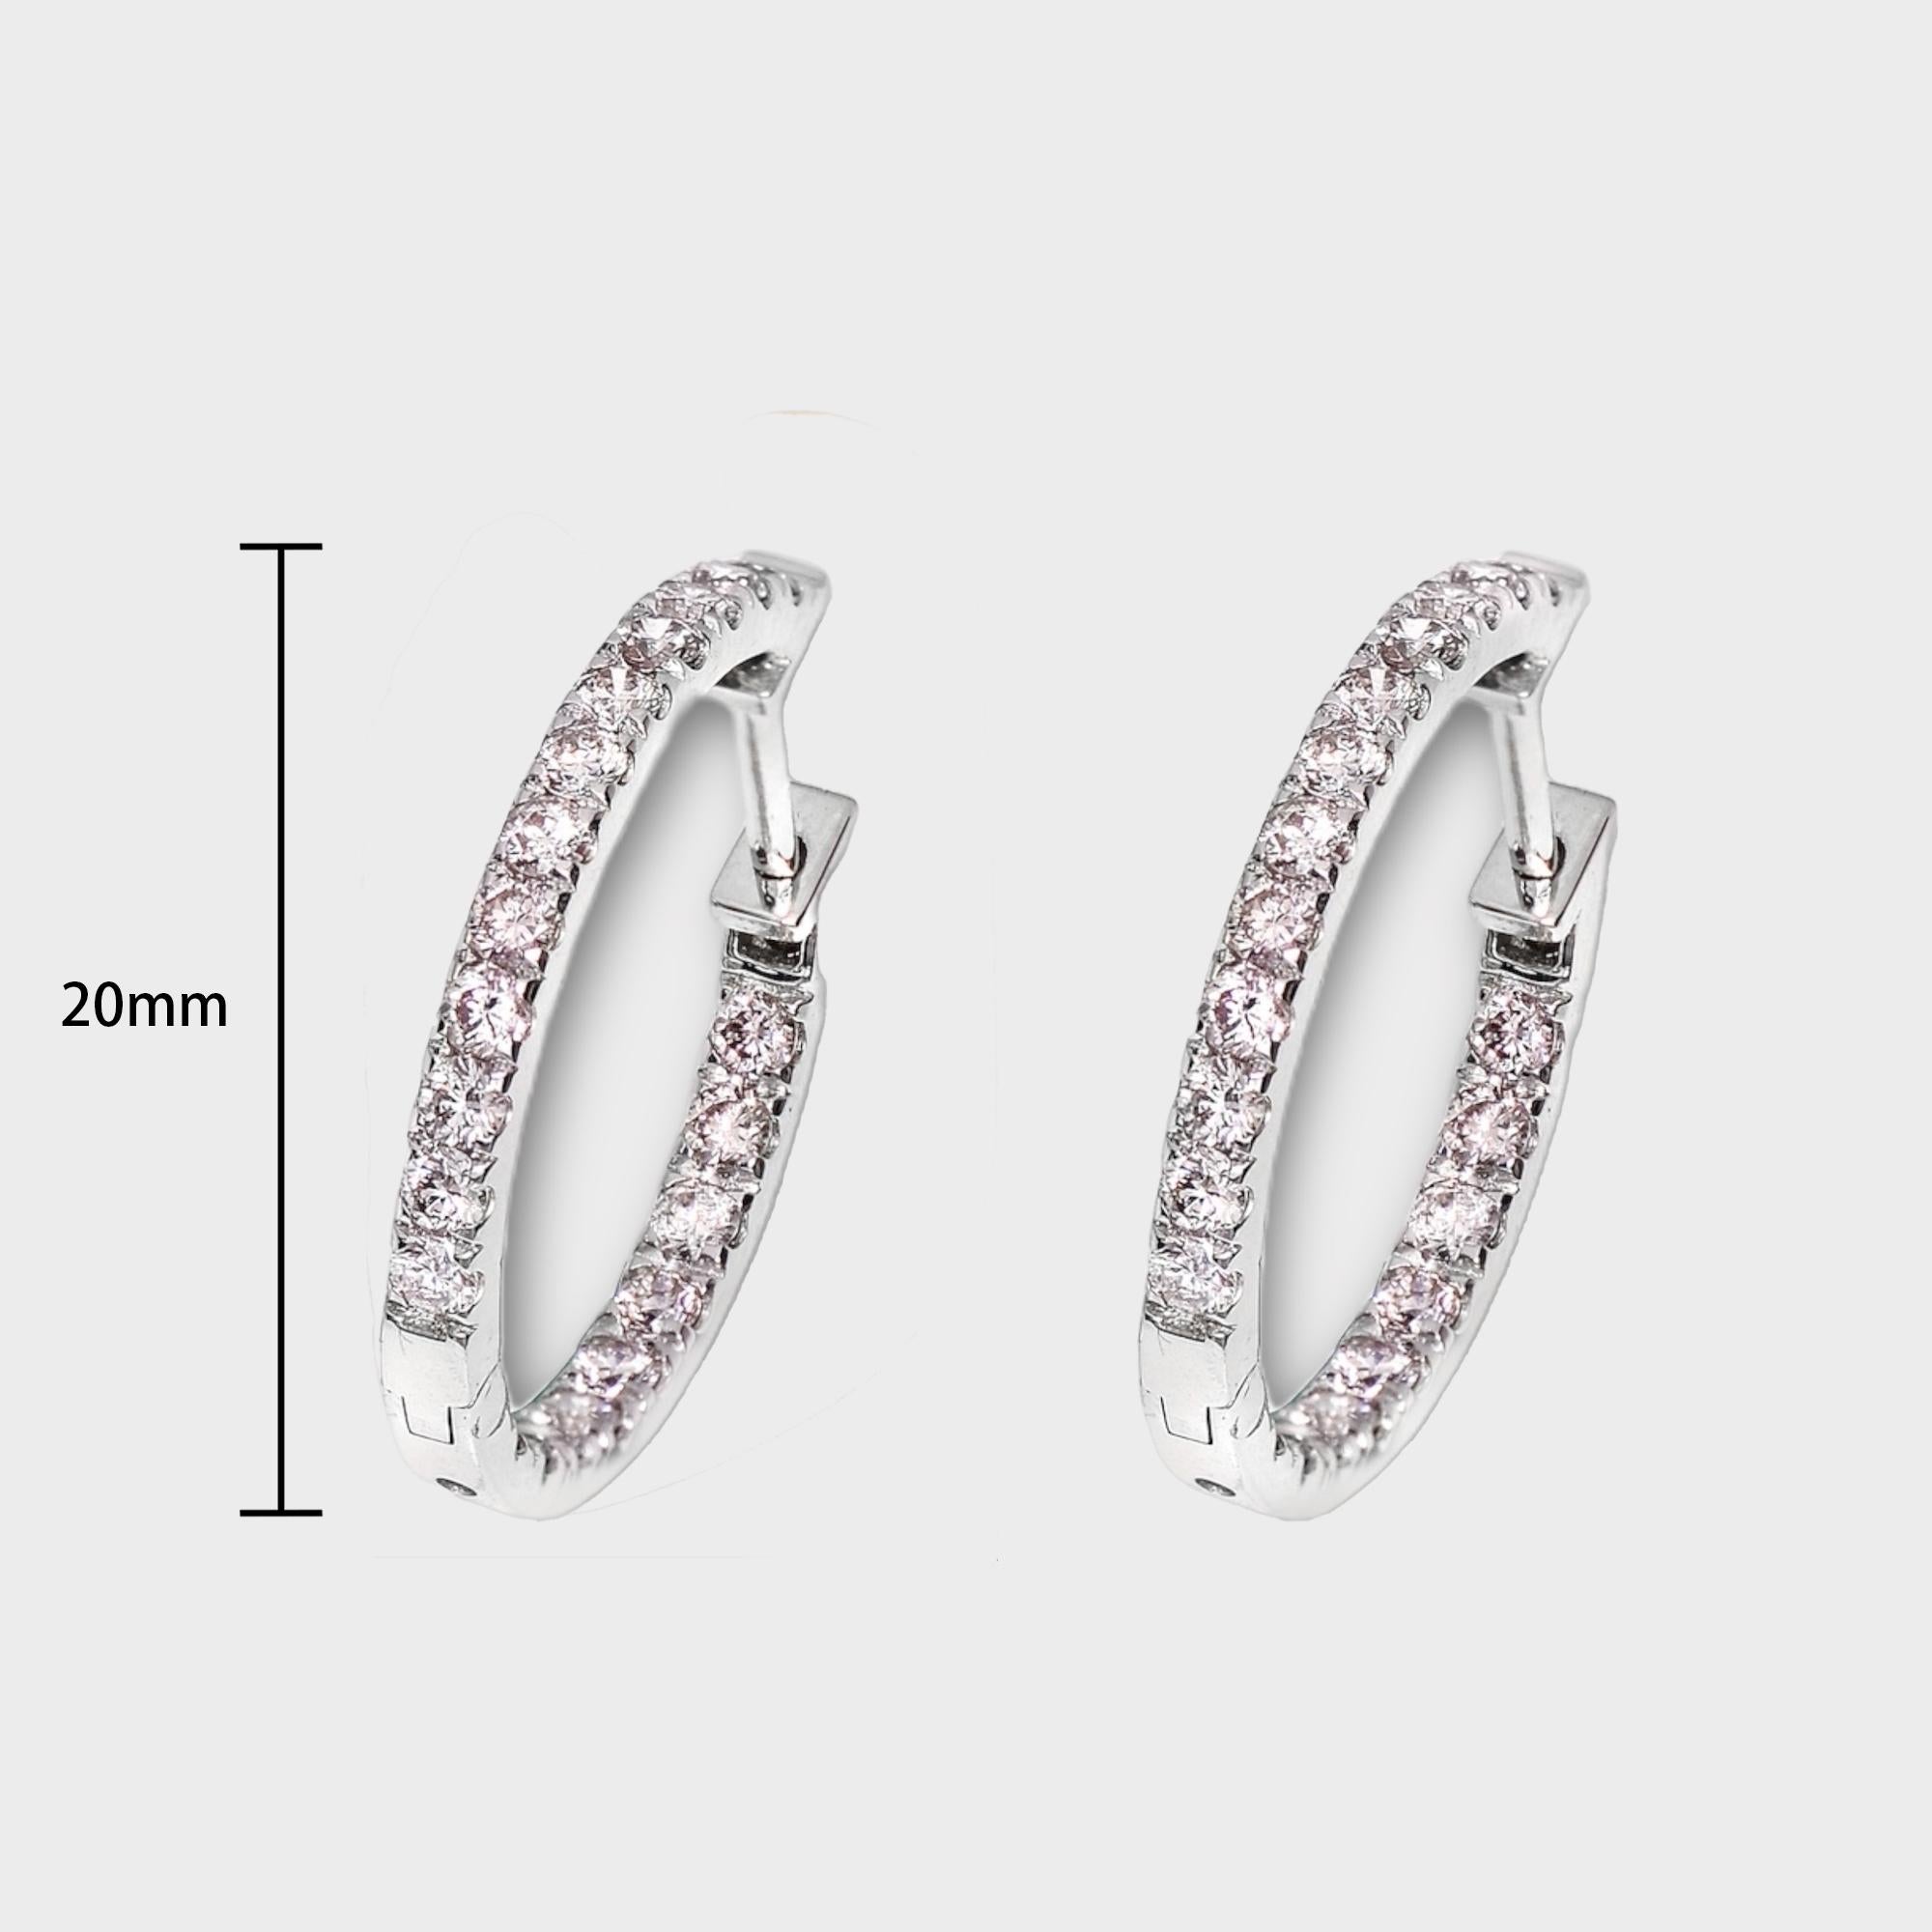 *IGI 14K 0.98 ct Natural Pink Diamonds Hoop Earrings*

Set with 42 pieces of round-shaped natural pink diamond weighing 0.98 carats, mounted in a 14K white gold prongs setting design band.

Accompanied by IGI report no. 17J5428924, stating that the